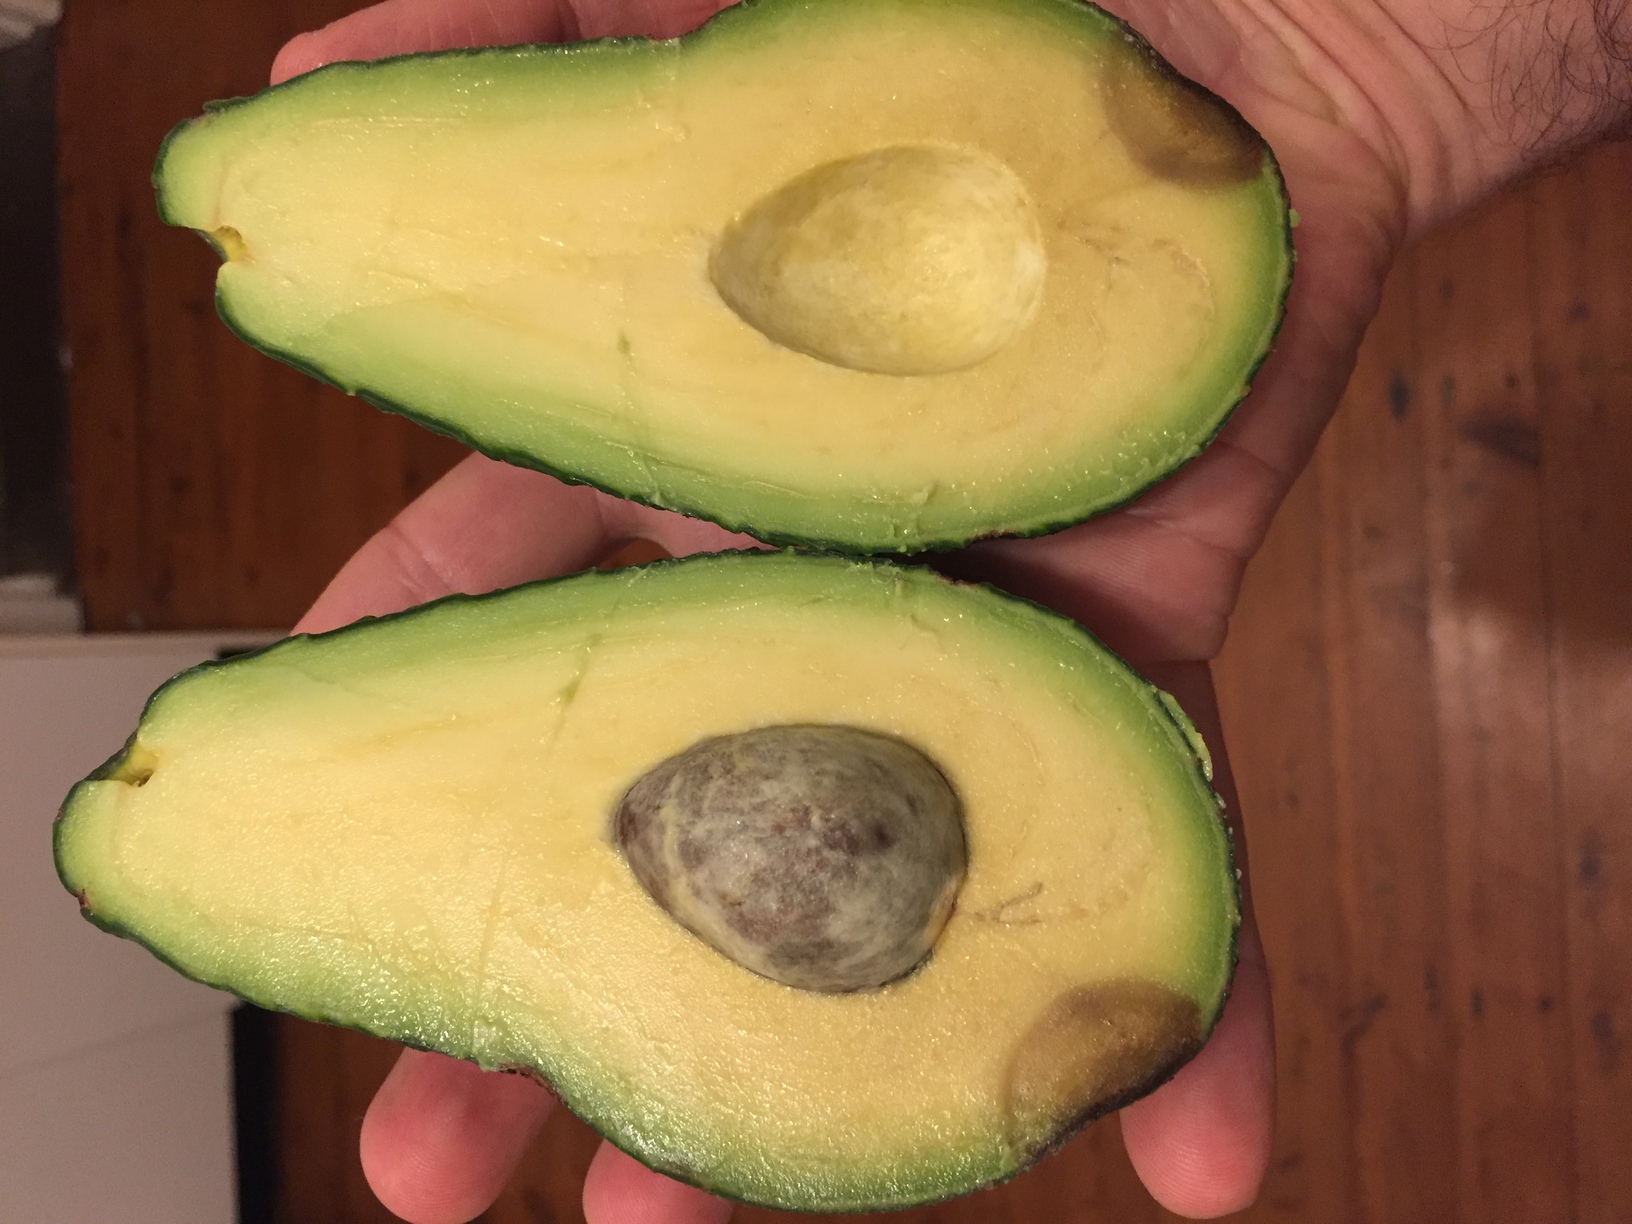 Pinkerton avocado cut open with one little brown spot near the bottom. Quite a small seed given the size of the fruit. Nice flavour.